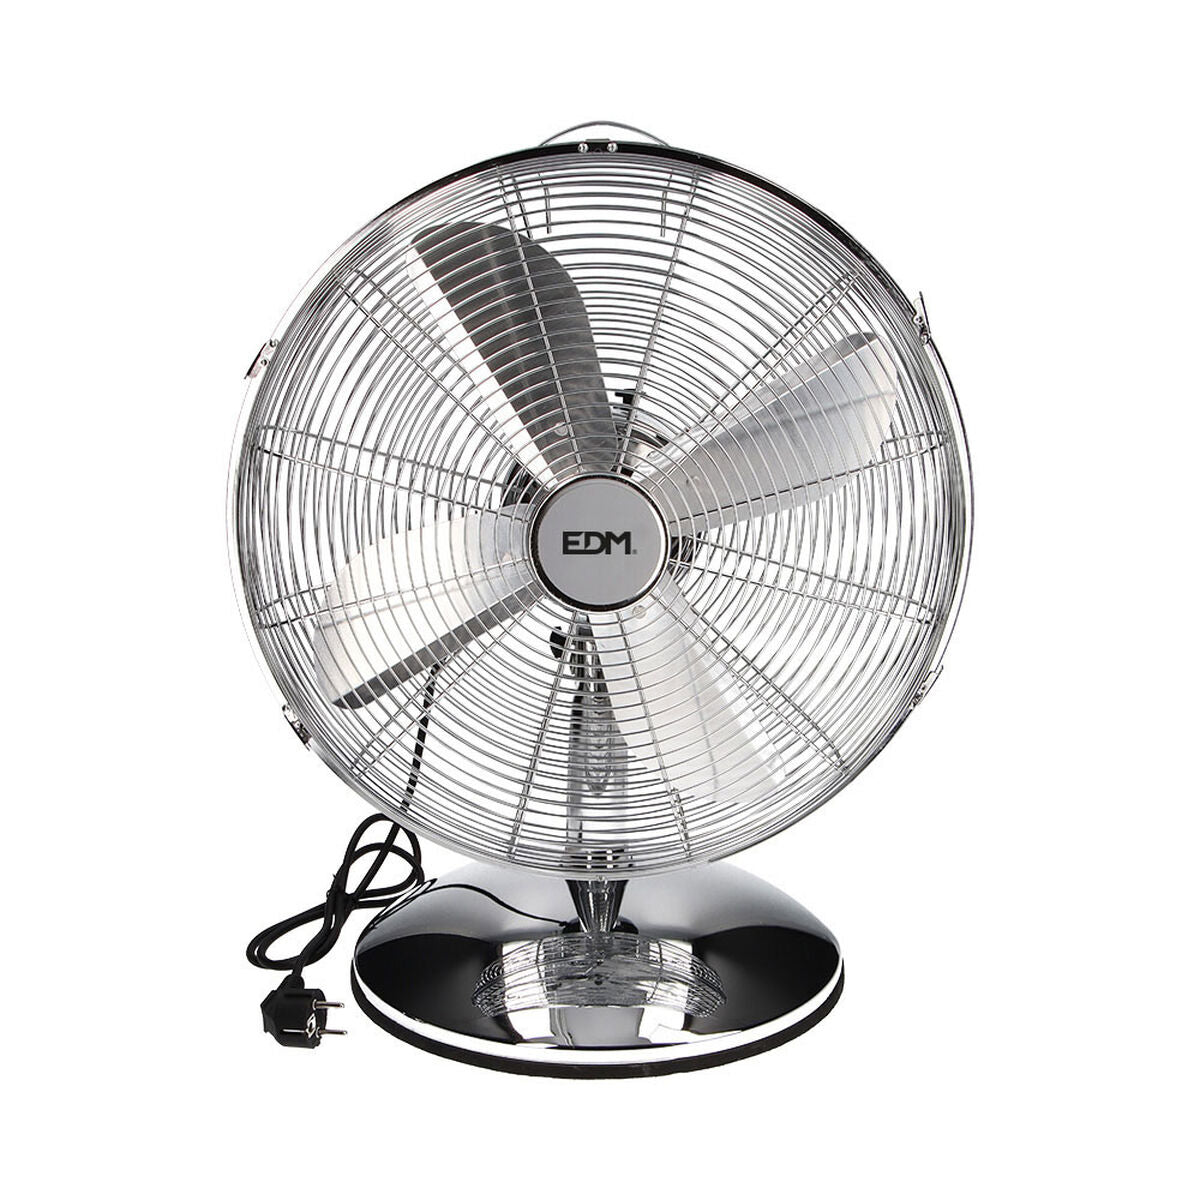 Table Fan EDM Silver 60 W Ø 40 x 55 cm, EDM, Home and cooking, Portable air conditioning, table-fan-edm-silver-60-w-o-40-x-55-cm, Brand_EDM, category-reference-2399, category-reference-2450, category-reference-2451, category-reference-t-19656, category-reference-t-21087, category-reference-t-25217, Condition_NEW, ferretería, Price_50 - 100, summer, RiotNook